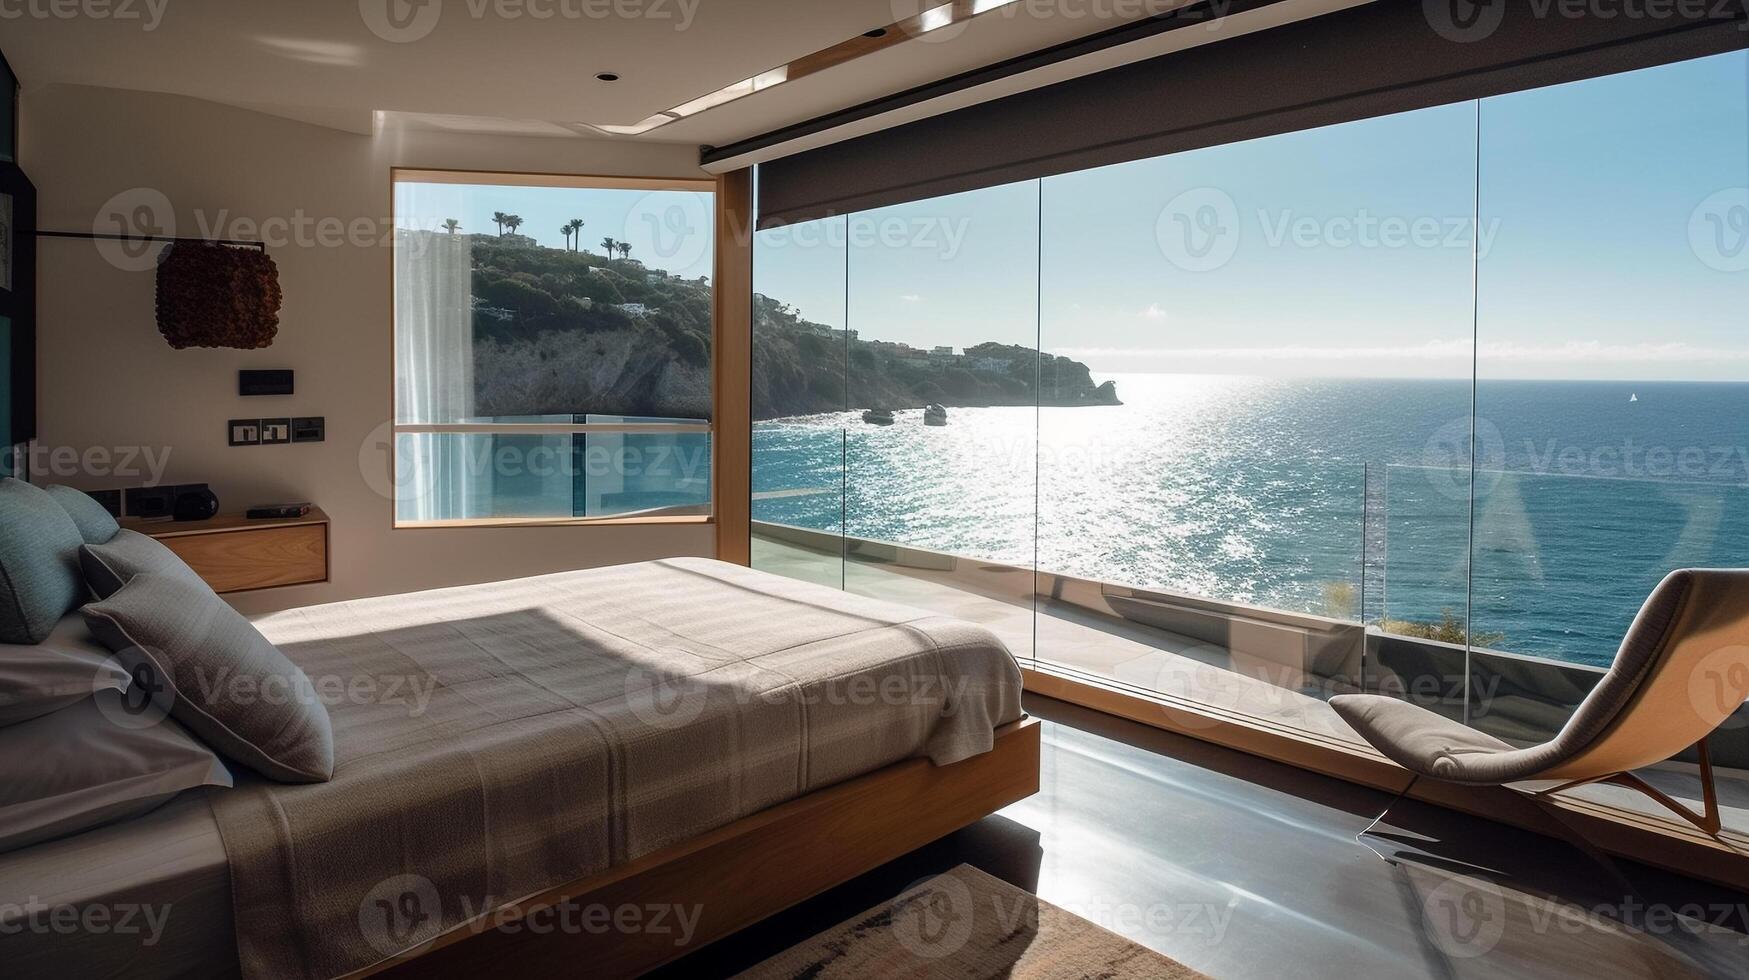 A bedroom with a view of the ocean. photo